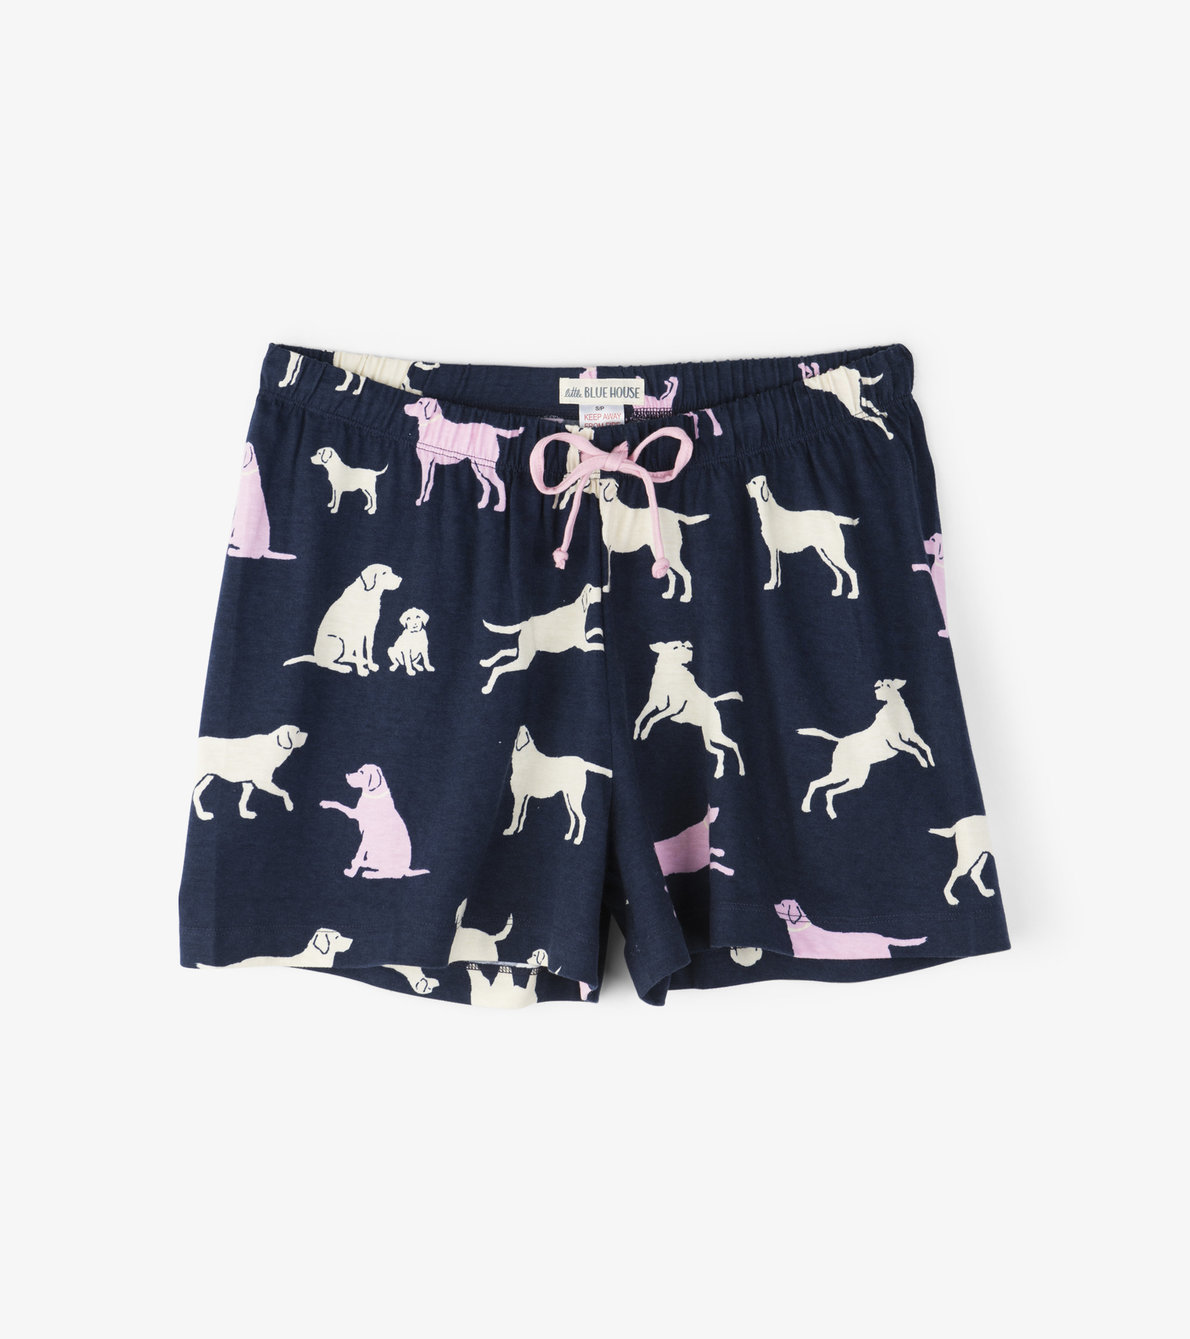 View larger image of Little Labs Women's Sleep Shorts